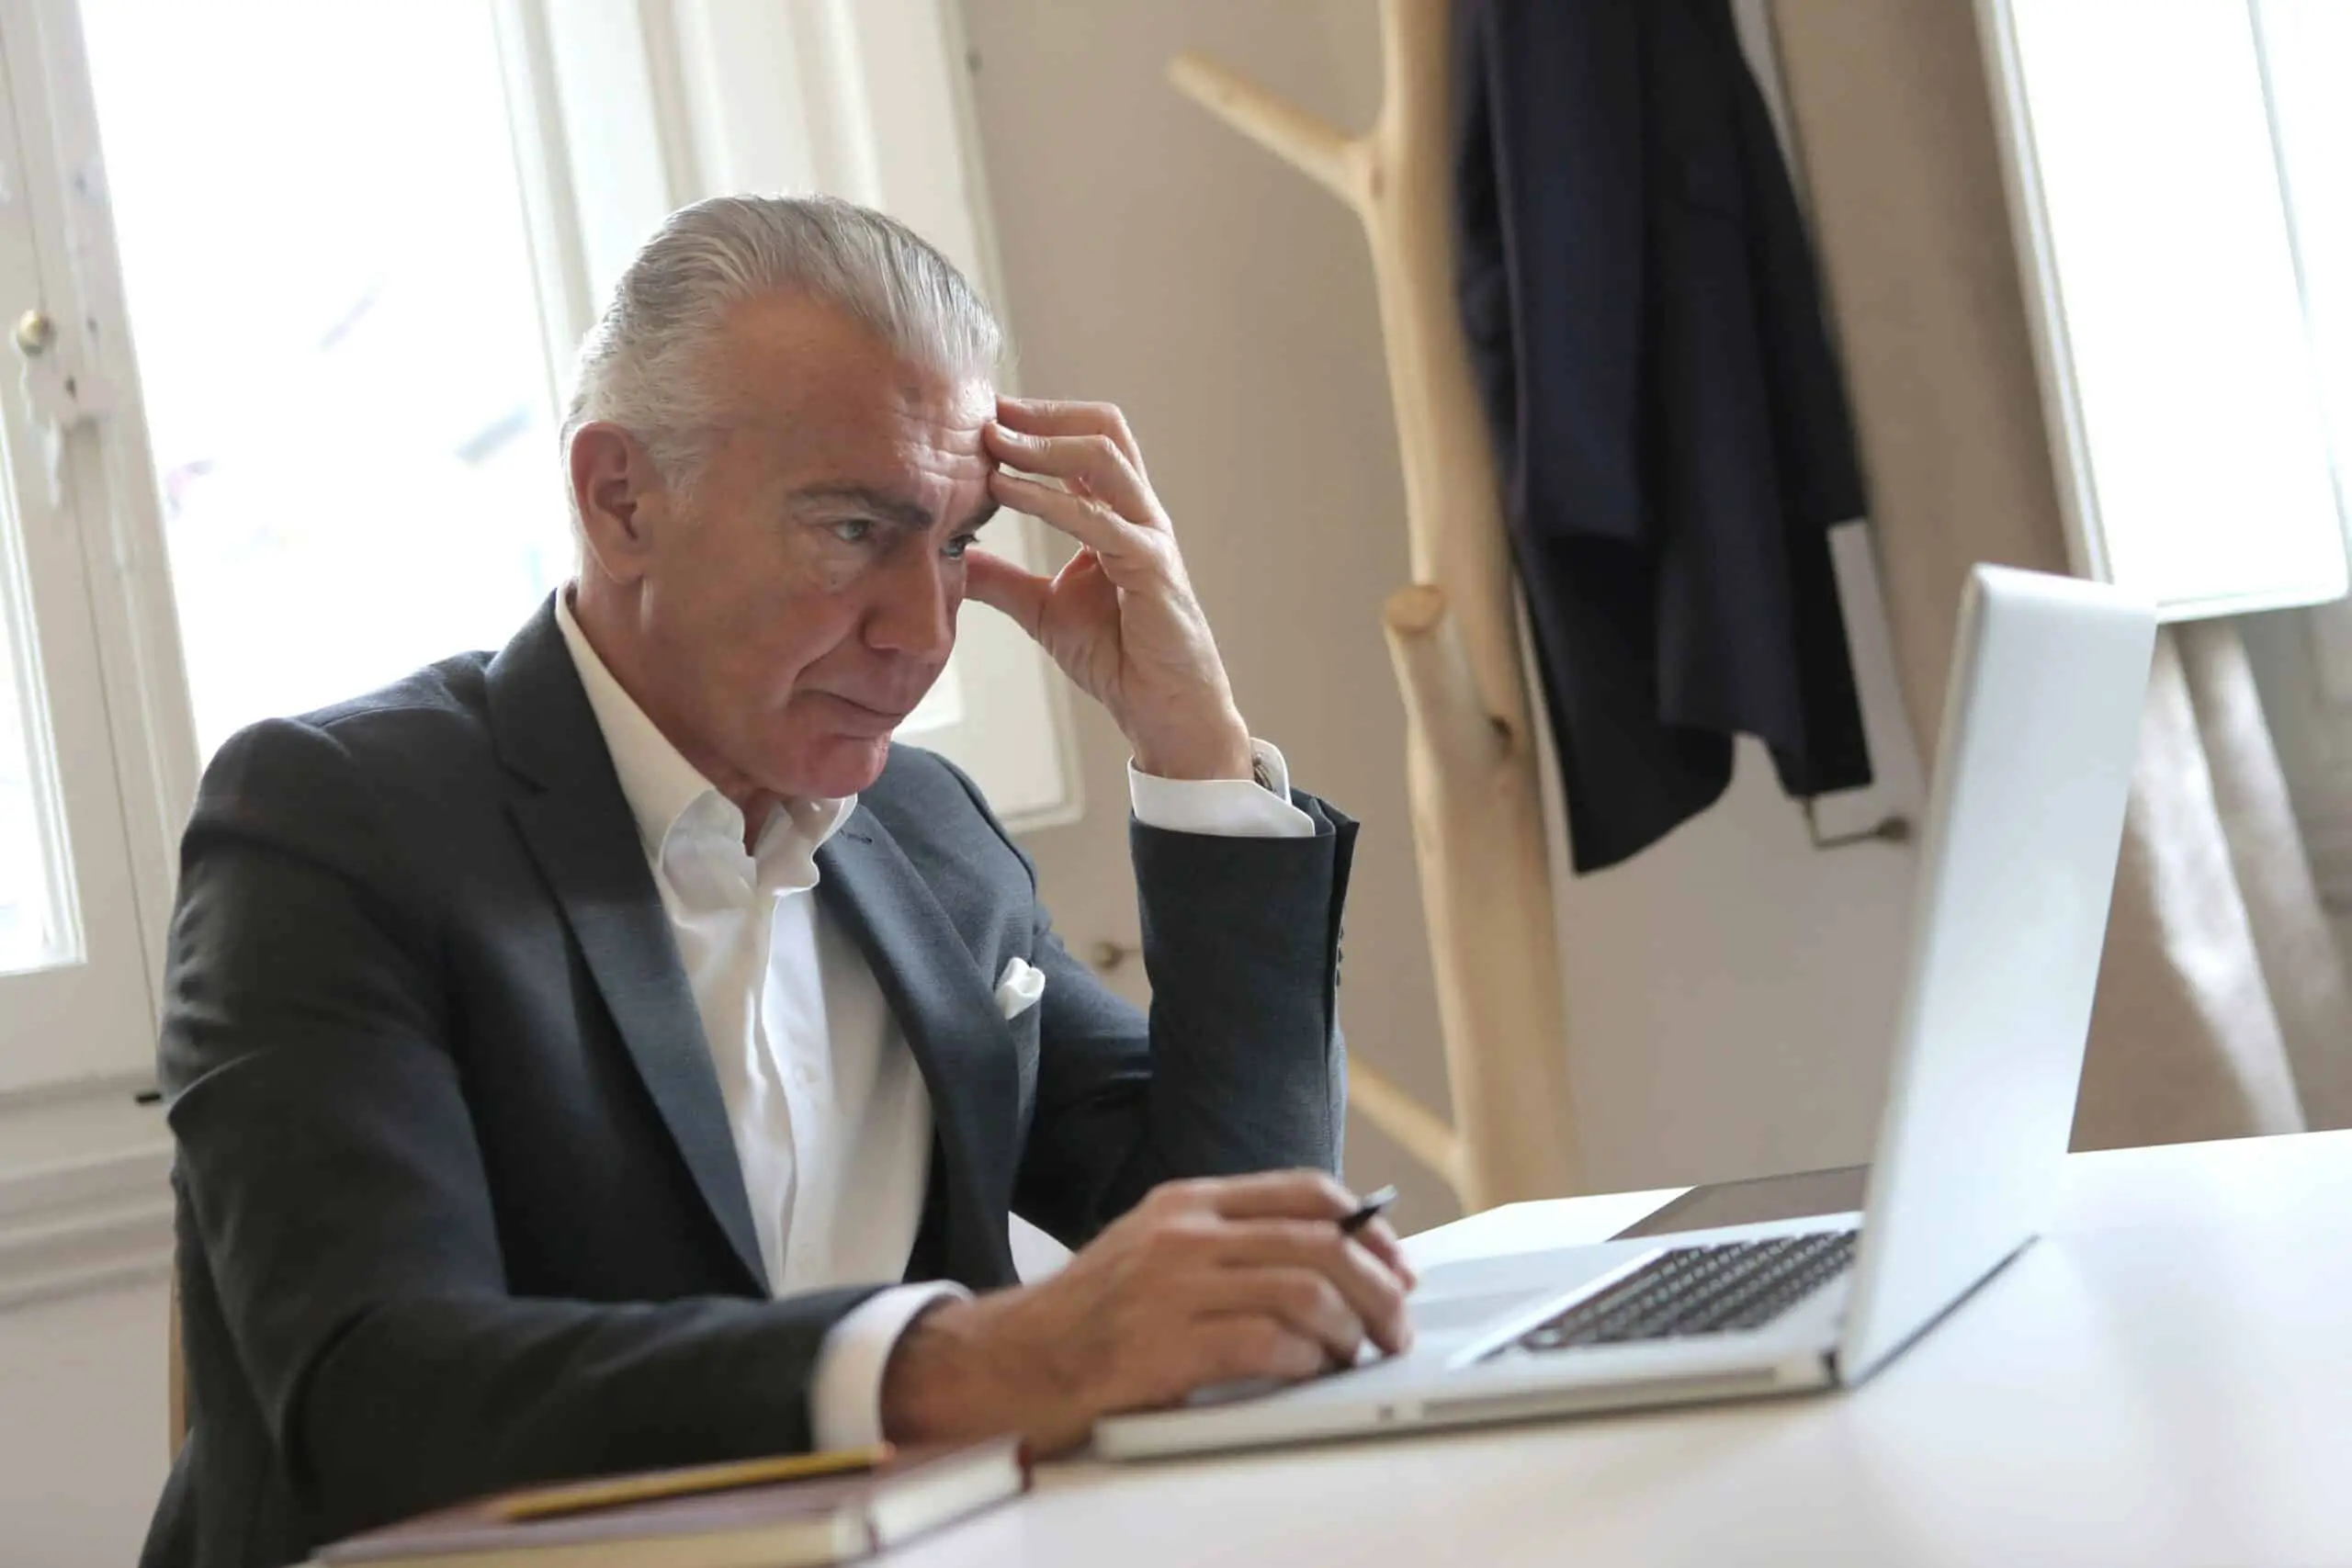 Man in a black suit looking at a laptop